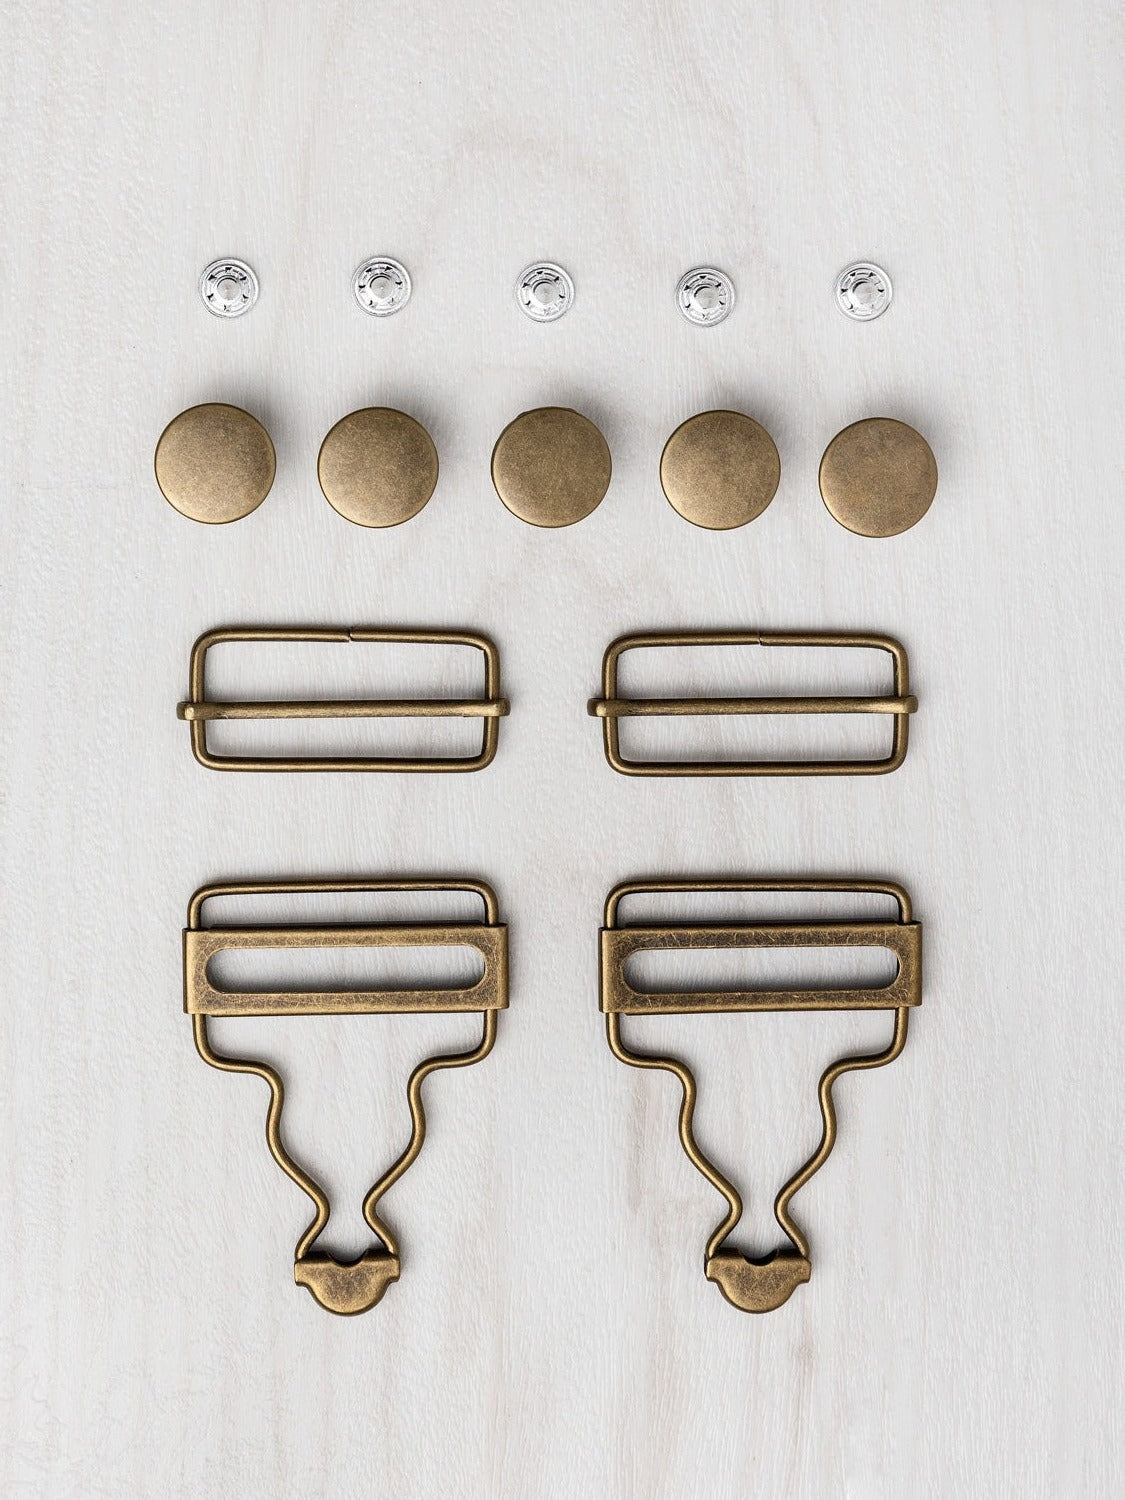 Overall buckles & sliders | Dungaree buckles | Antique Brass finish // Hardware kit by Closet Core Patterns